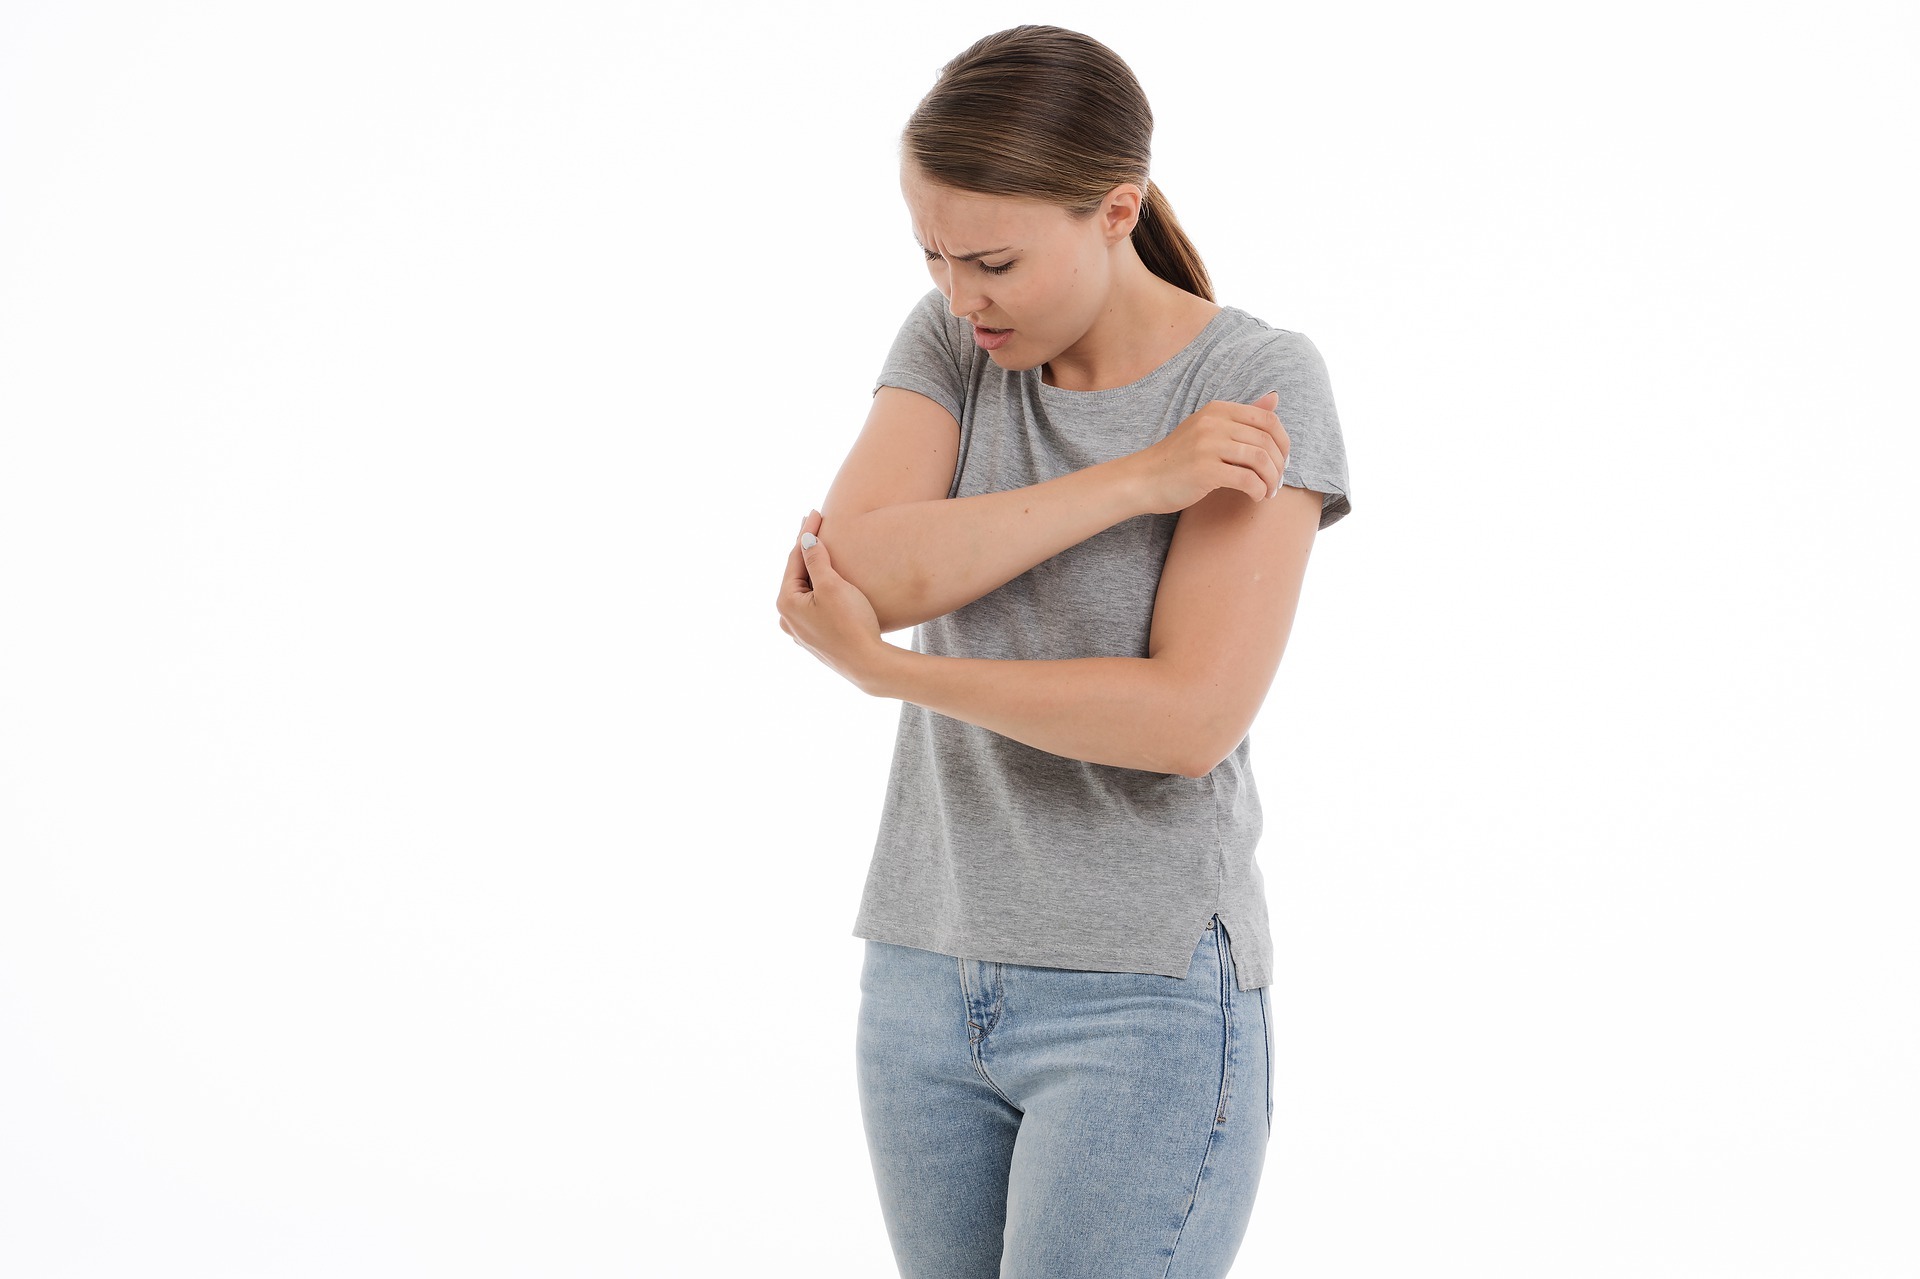 Elbow Pain – it hurts to move my elbow